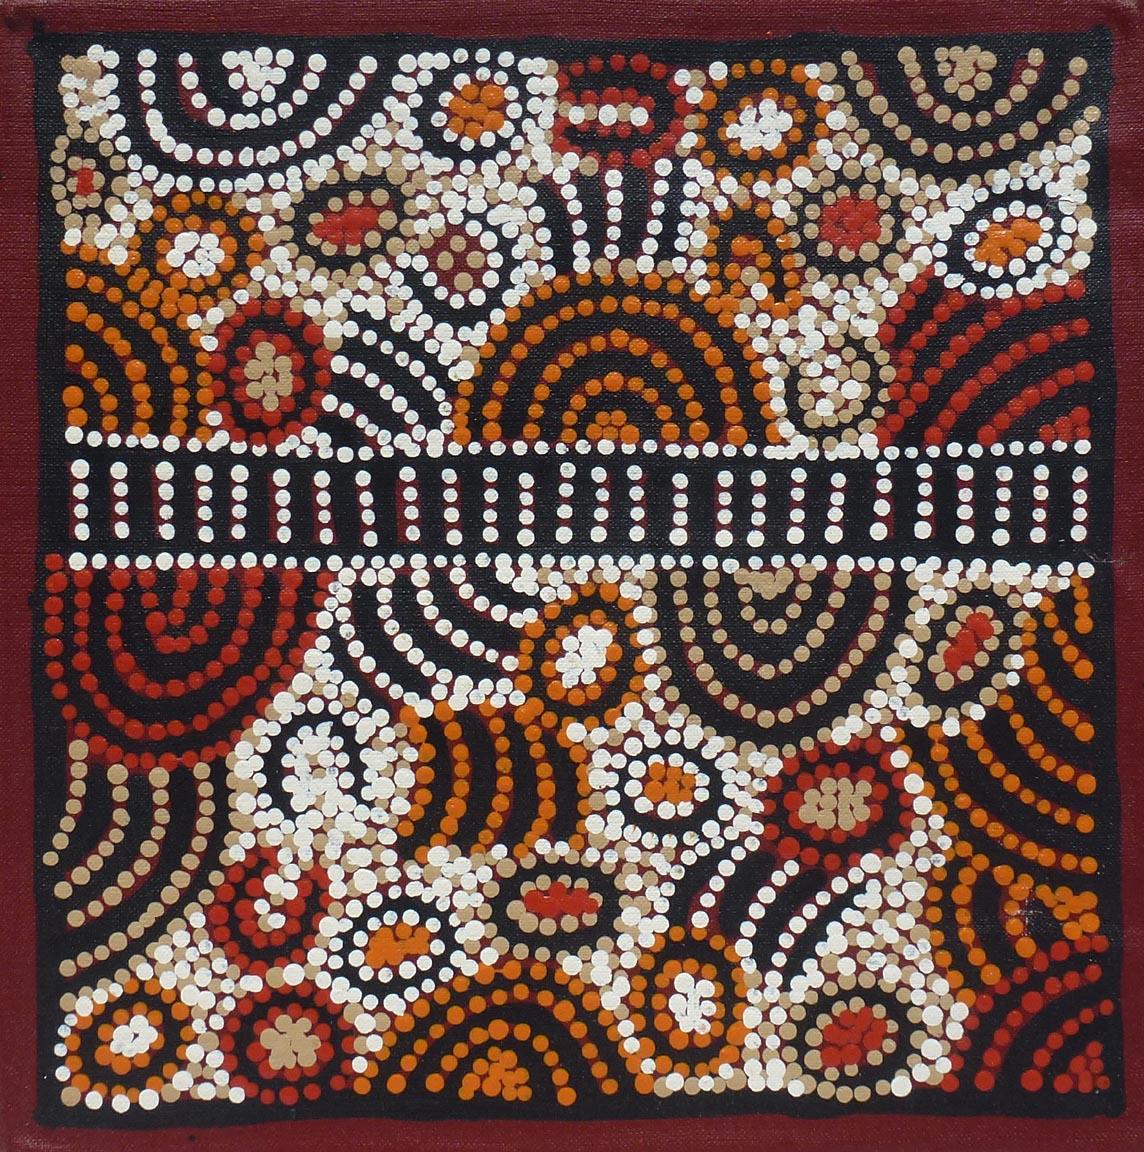 This is a Fine Dot Painting by the Australian Aboriginal 
Drawing Kim Butler Napurrula. It is on unstretched canvas and is dated 
2015.  The overall size of the canvas is approximately 16